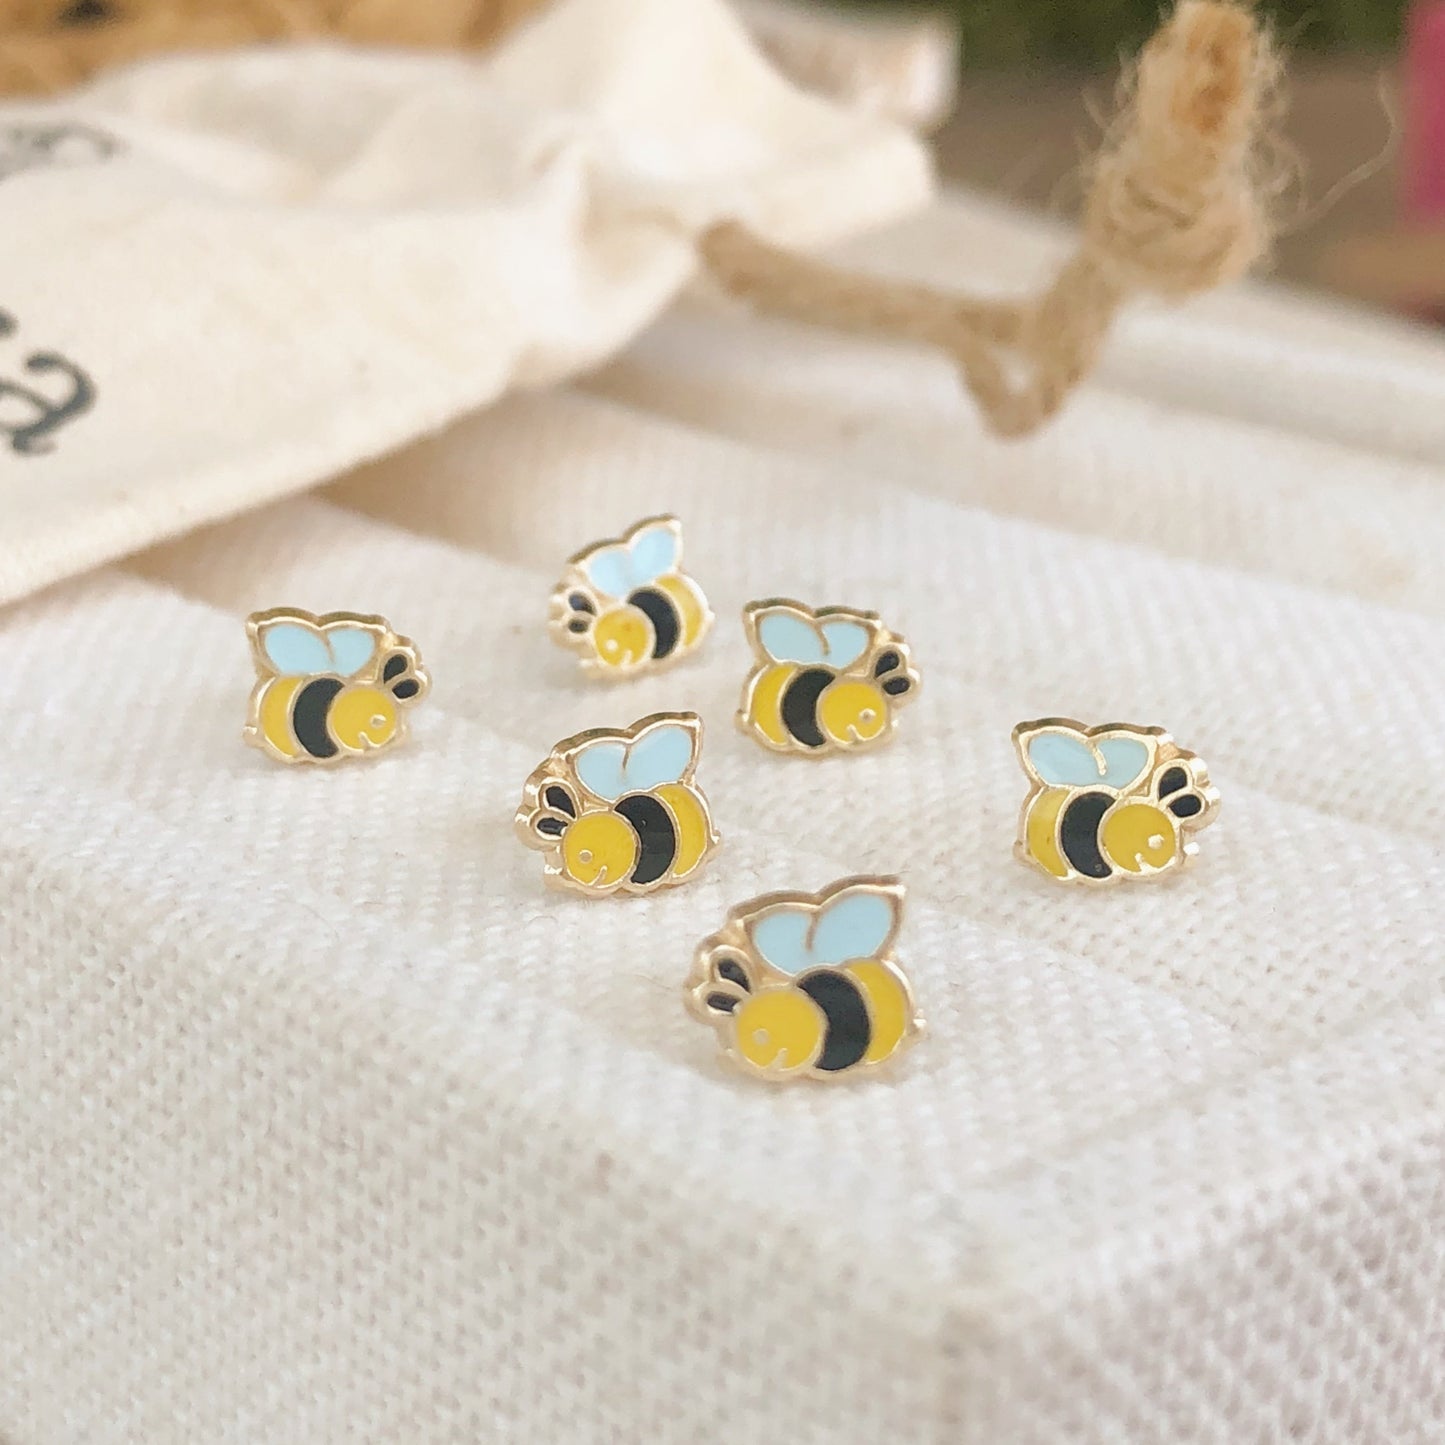 This little honey bee is ready to make all your summer wishes come true! They are made of 10K gold, so they are hypoallergenic and safe for sensitive ears.